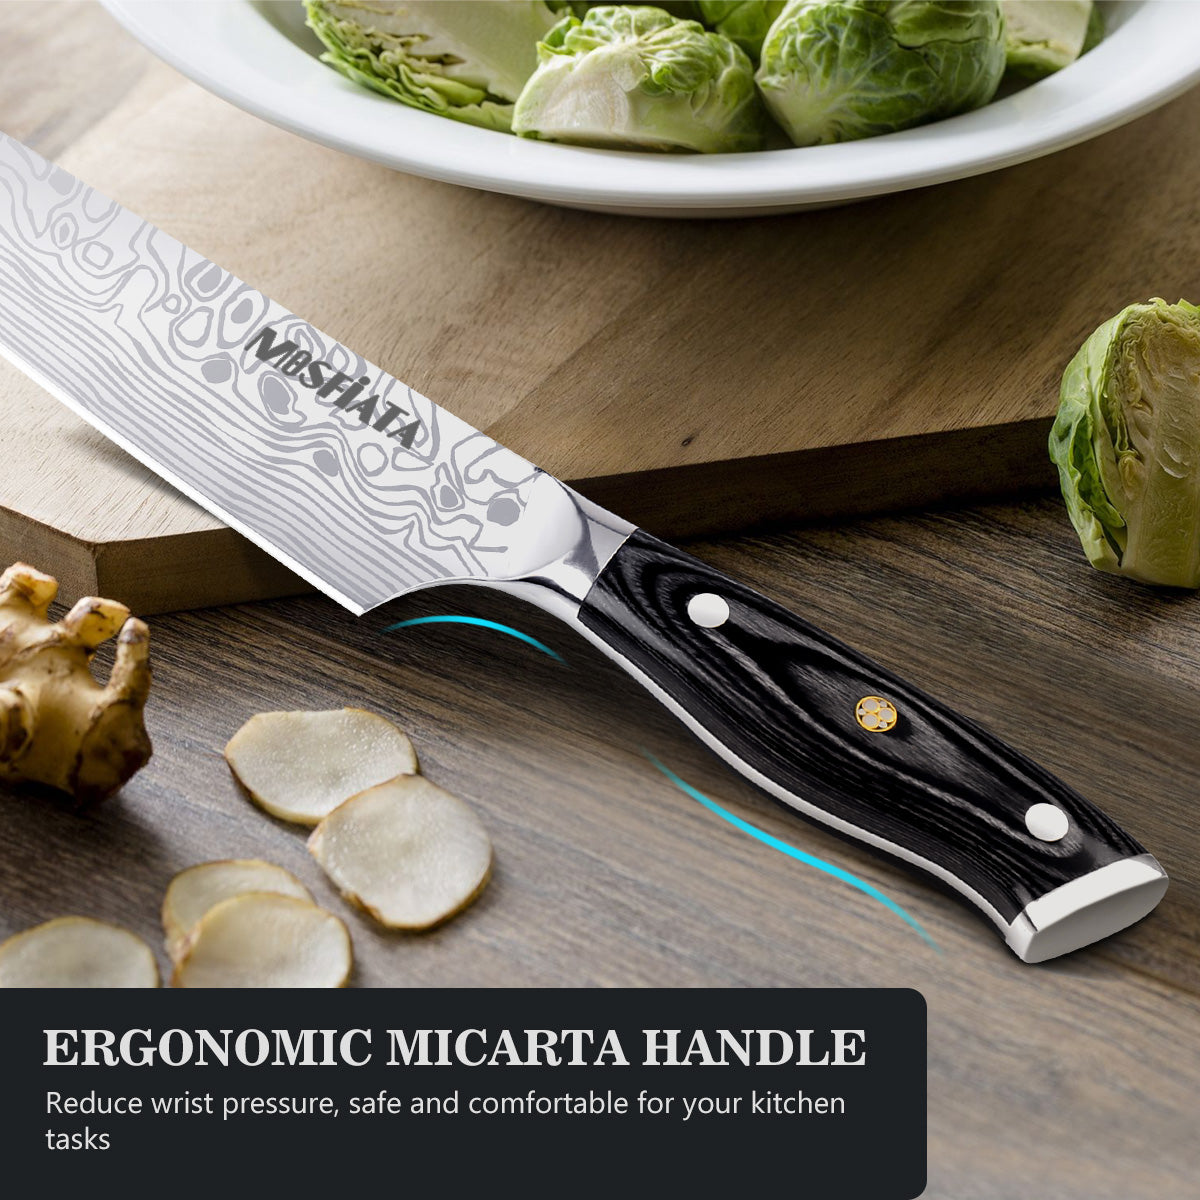 MOSFiATA 8 Super Sharp Professional Chef's Knife, Why Choose The MOSFiATA  8-inch Chef Knife? MOSFiATA knives are made of high-quality German  stainless steel, which resists rust, corrosion, and, By MOSFiATAOnline